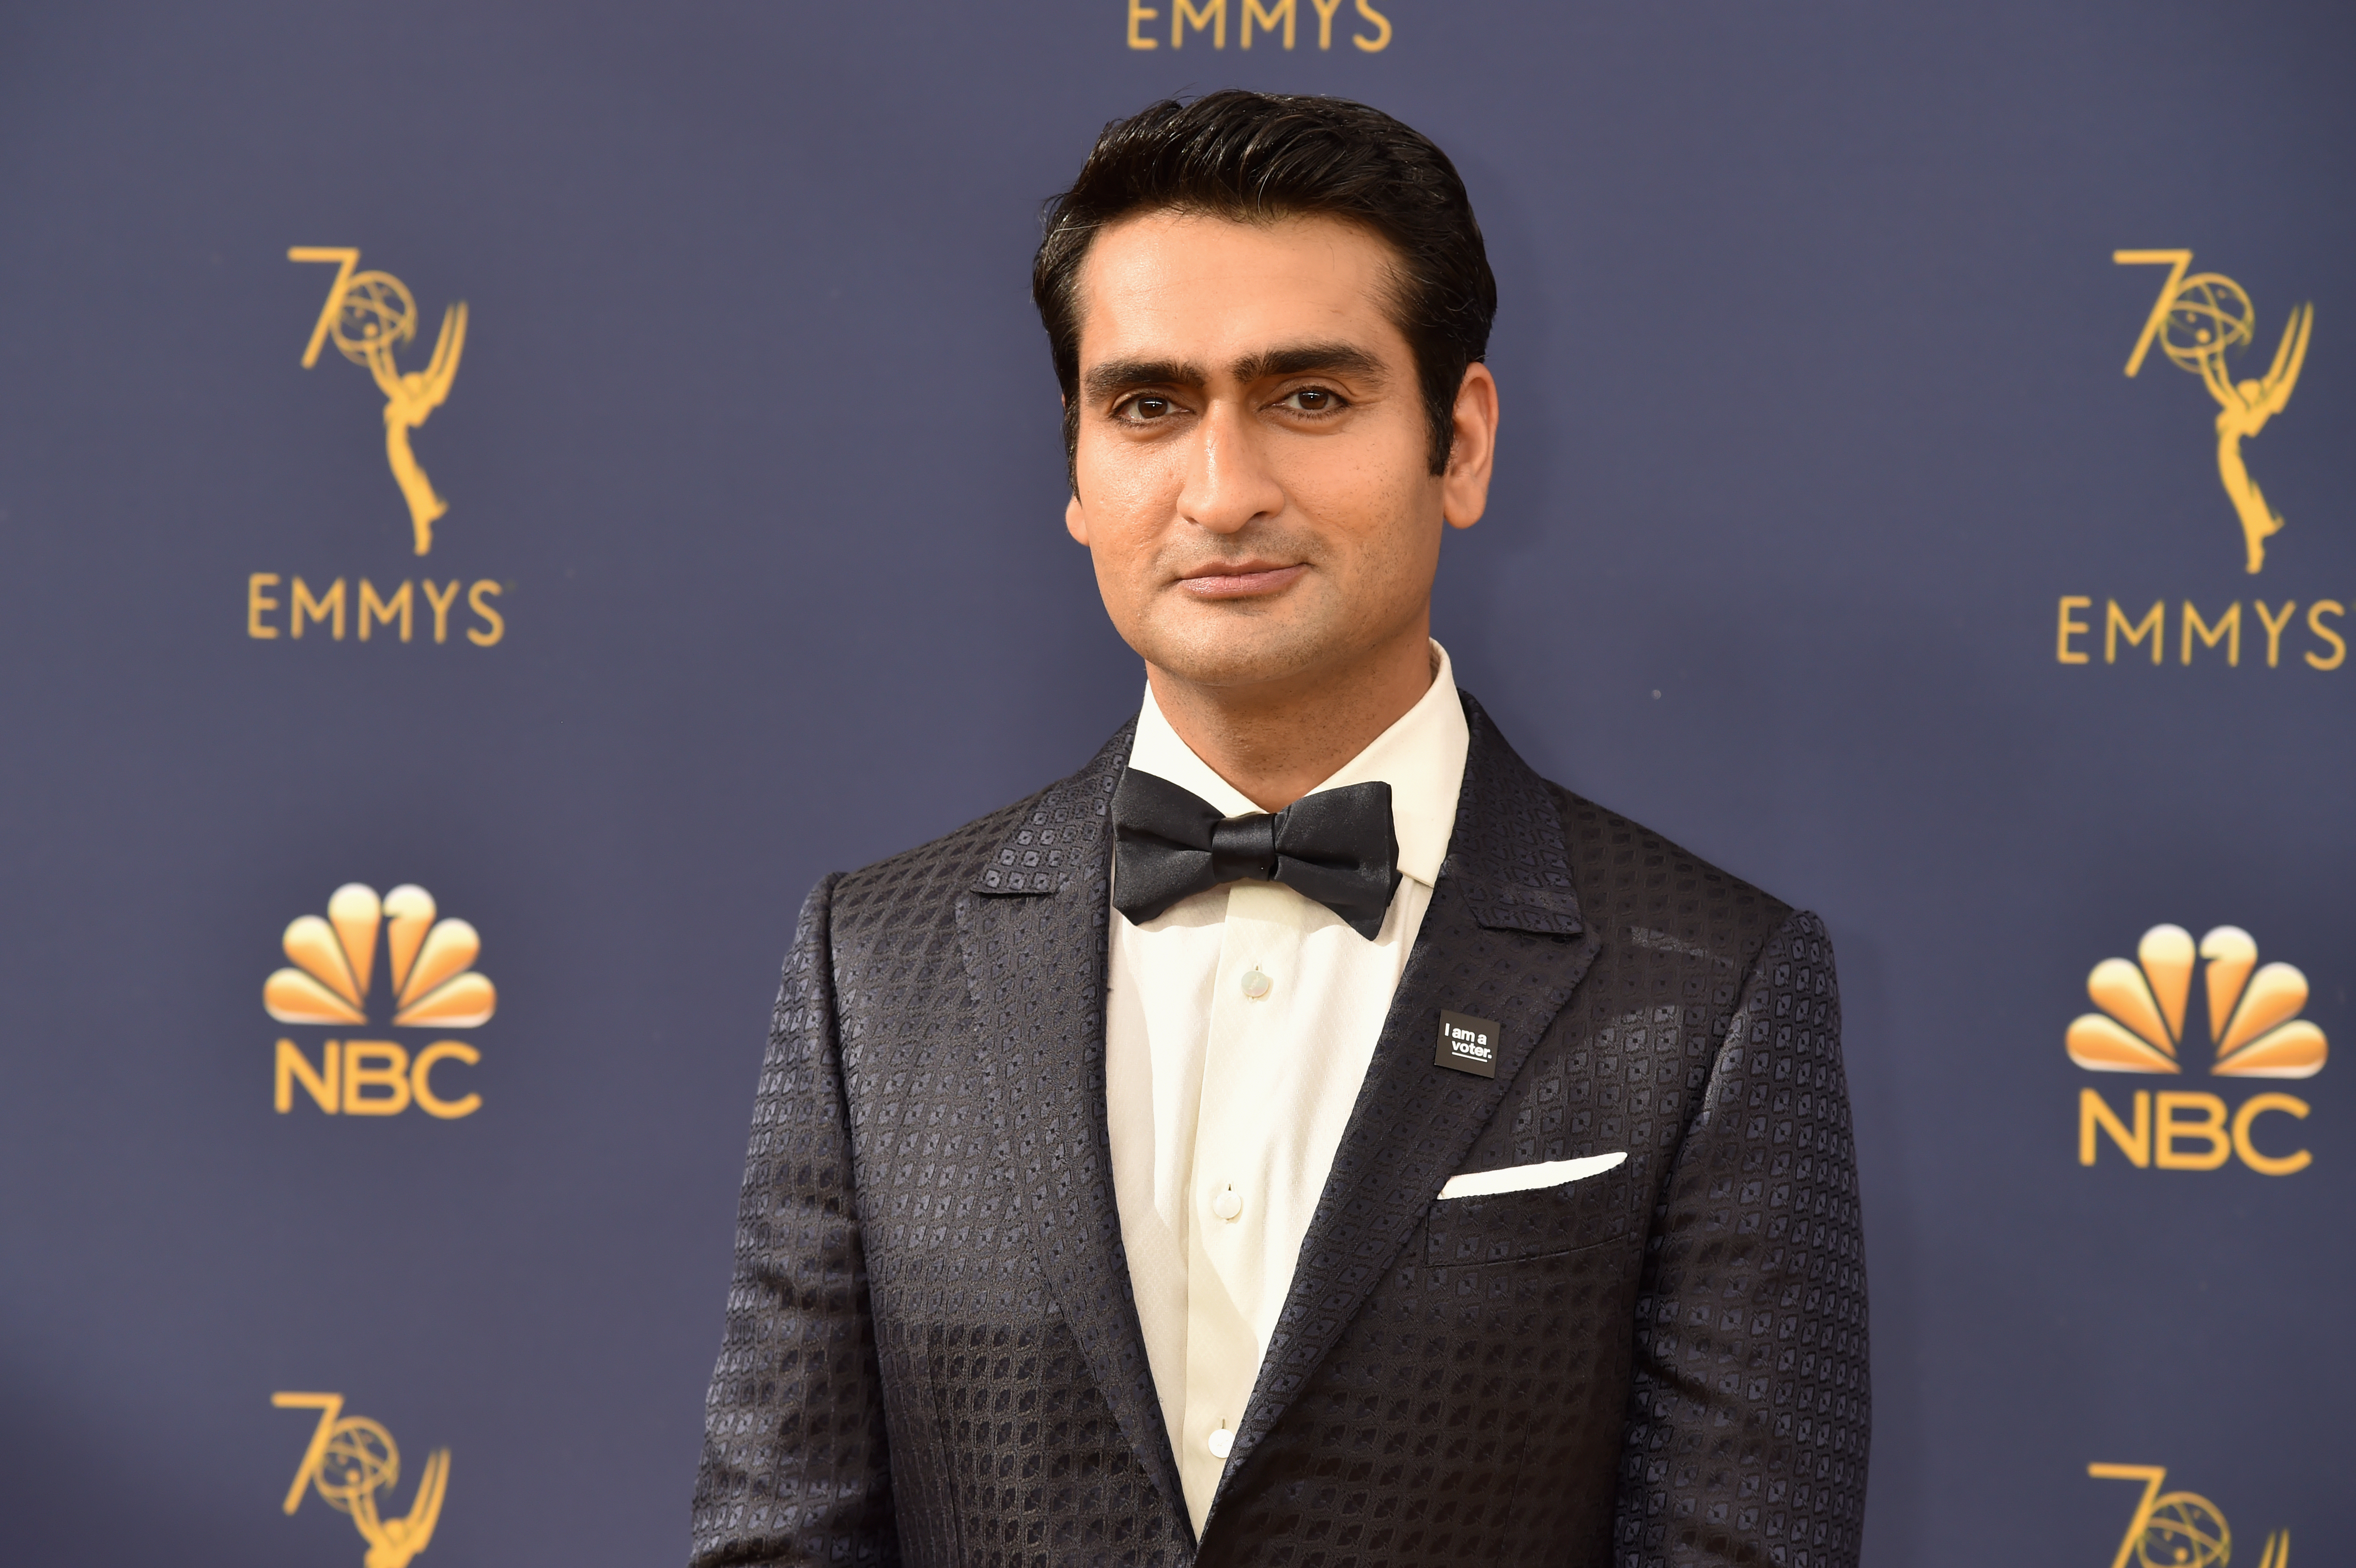 LOS ANGELES, CA - SEPTEMBER 17:  Kumail Nanjiani attends the 70th Emmy Awards at Microsoft Theater on September 17, 2018 in Los Angeles, California.  (Photo by Jeff Kravitz/FilmMagic) (Jeff Kravitz—FilmMagic)